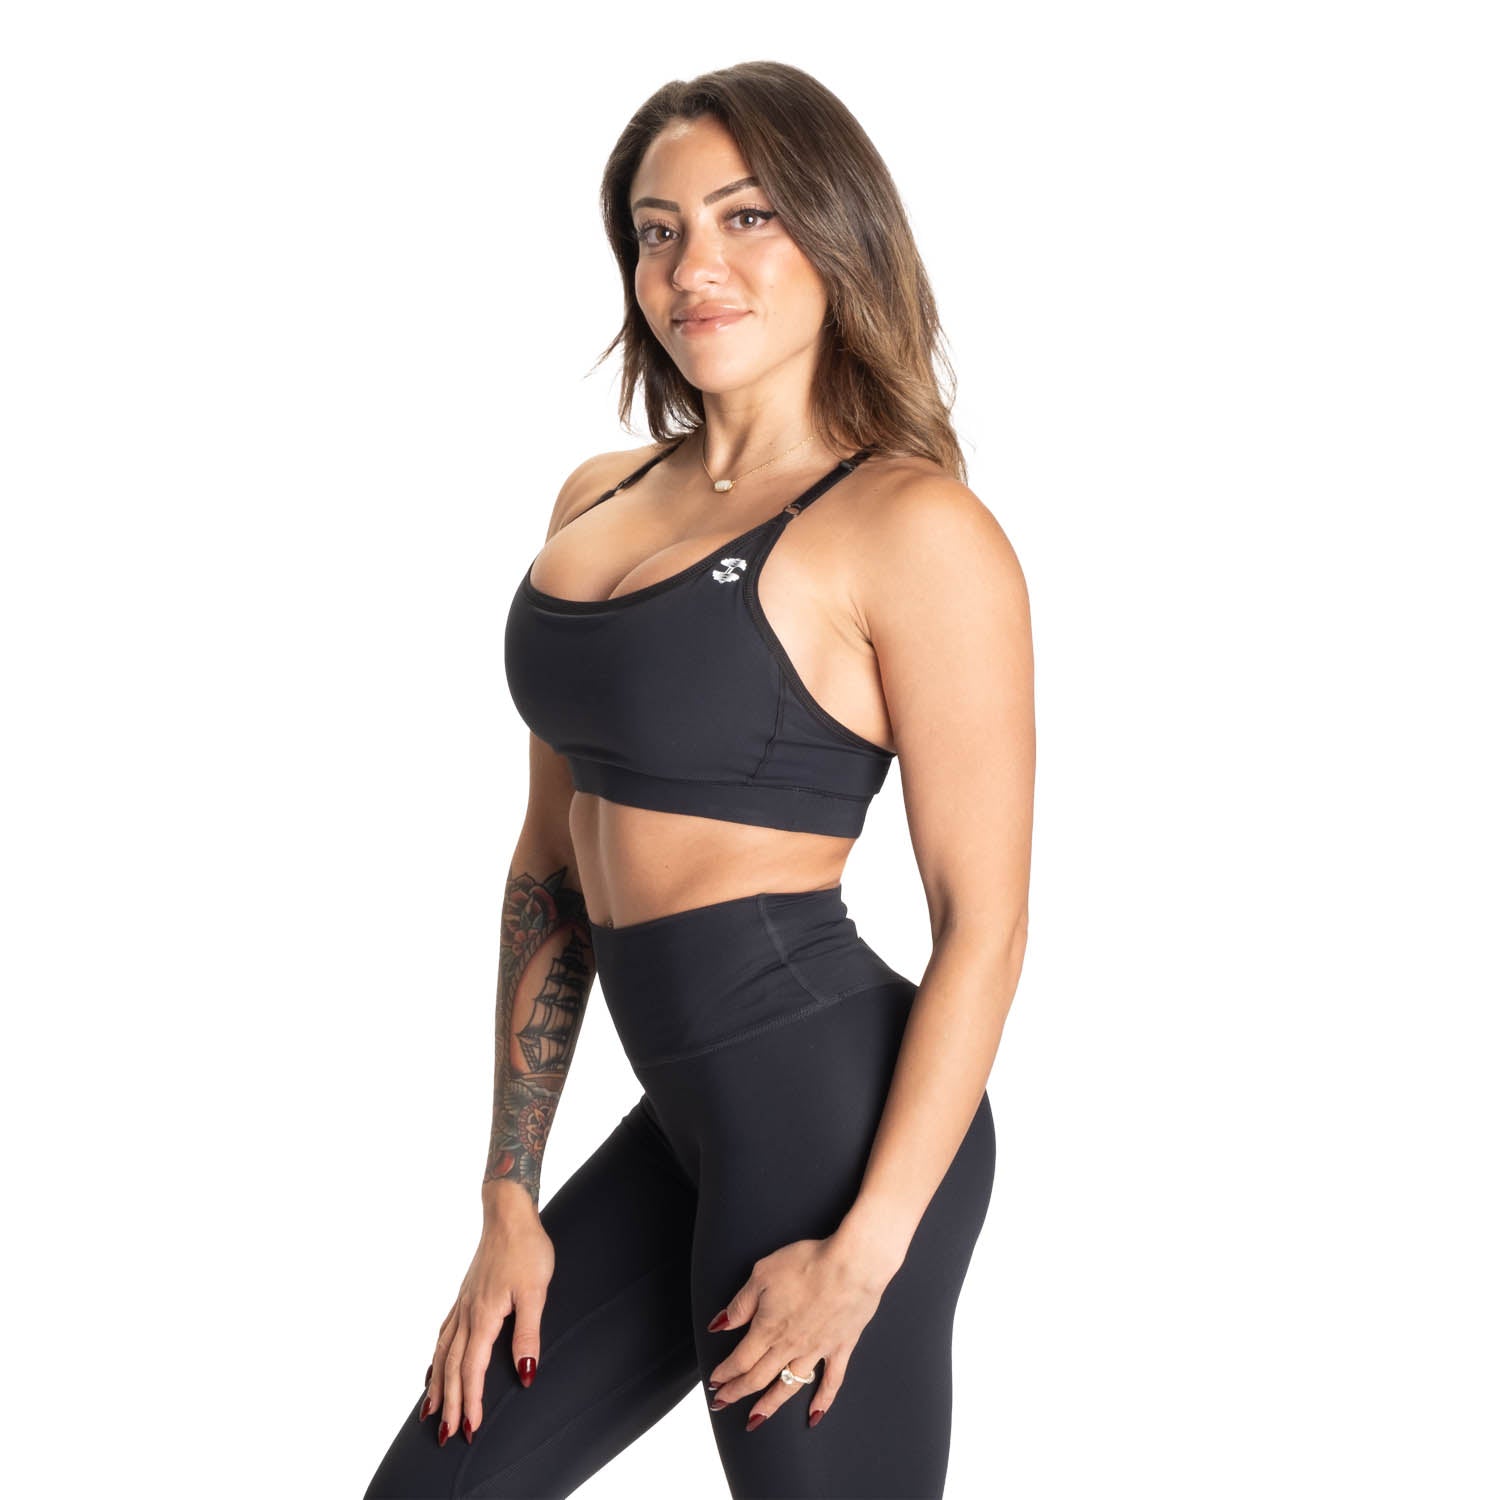 Women's Tracksuit Leggings Yoga Set With Pocket High Waist Gym Outfit -  ShapeBstar